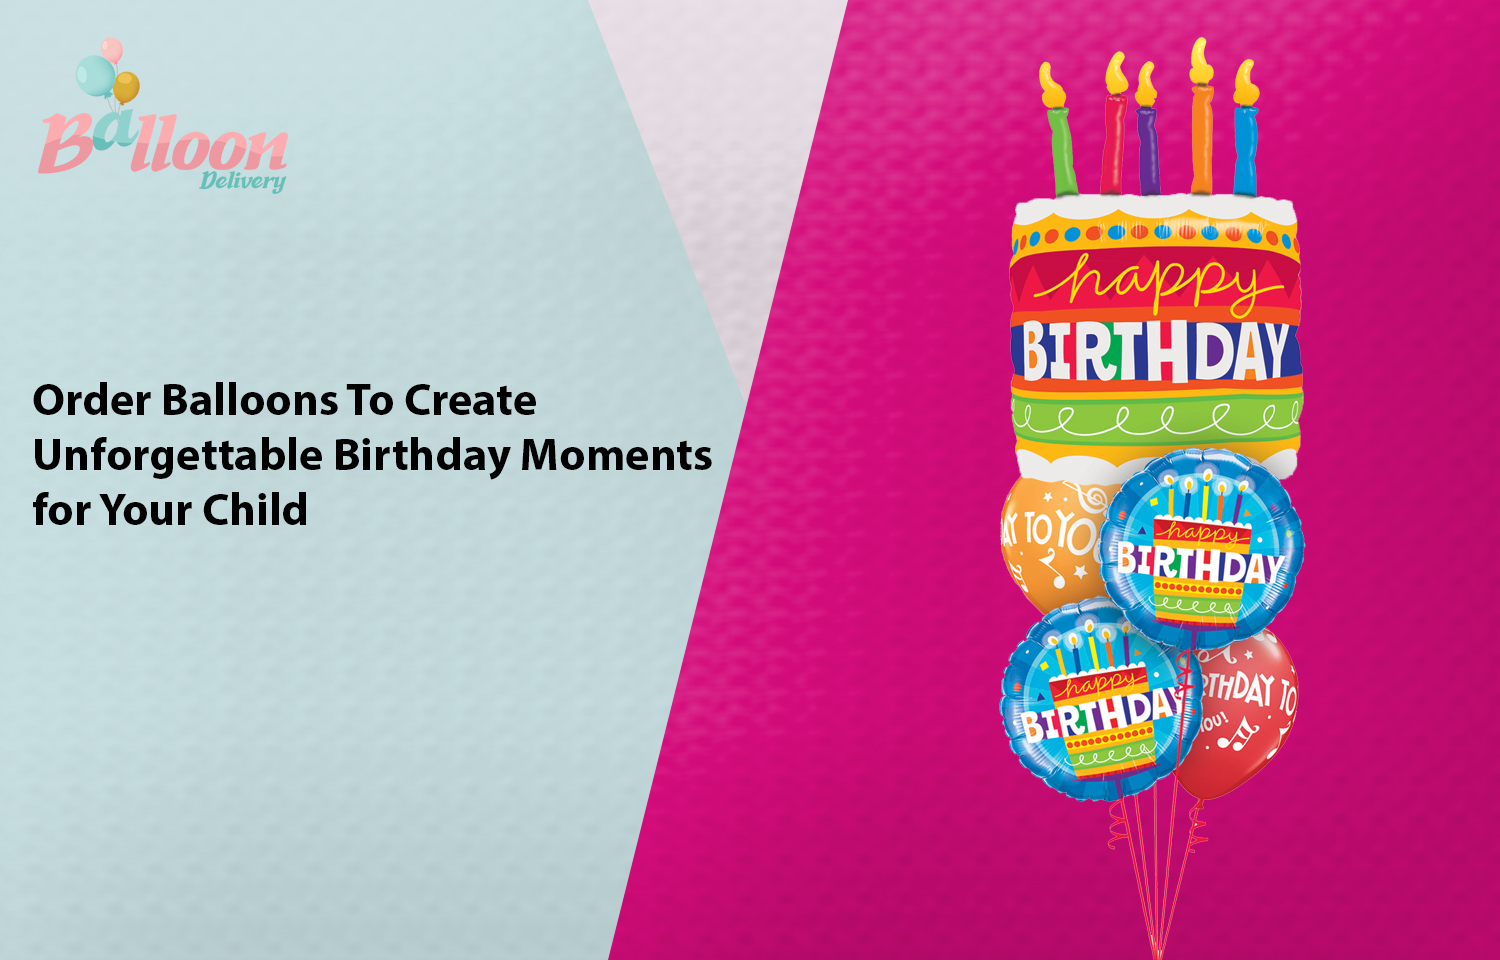 Order Balloons To Create Unforgettable Birthday Moments for Your Child